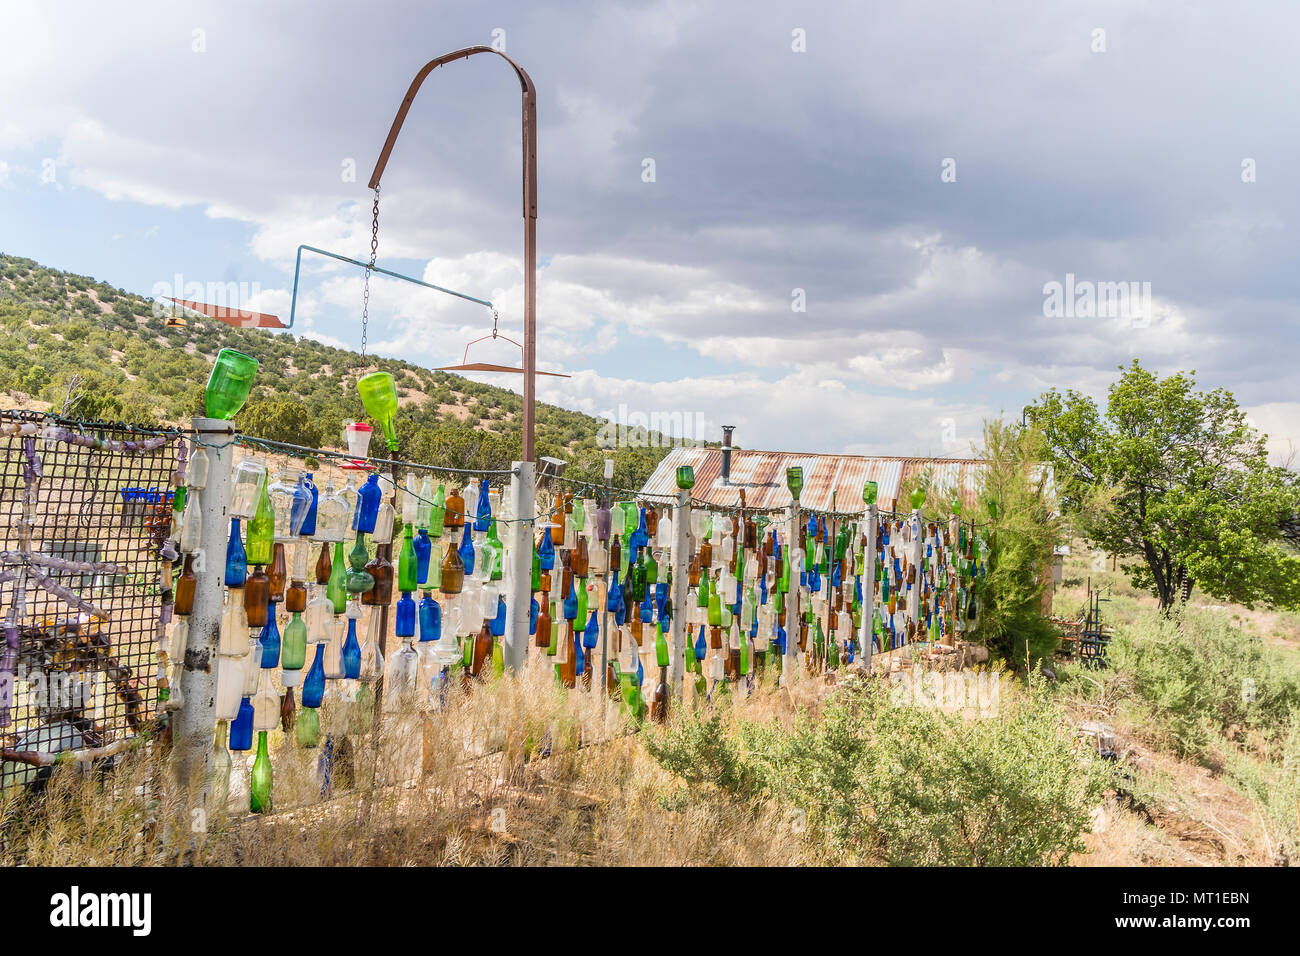 Hanging multicolored glass bottles make up a unique fence in Golden, New Mexico. Stock Photo